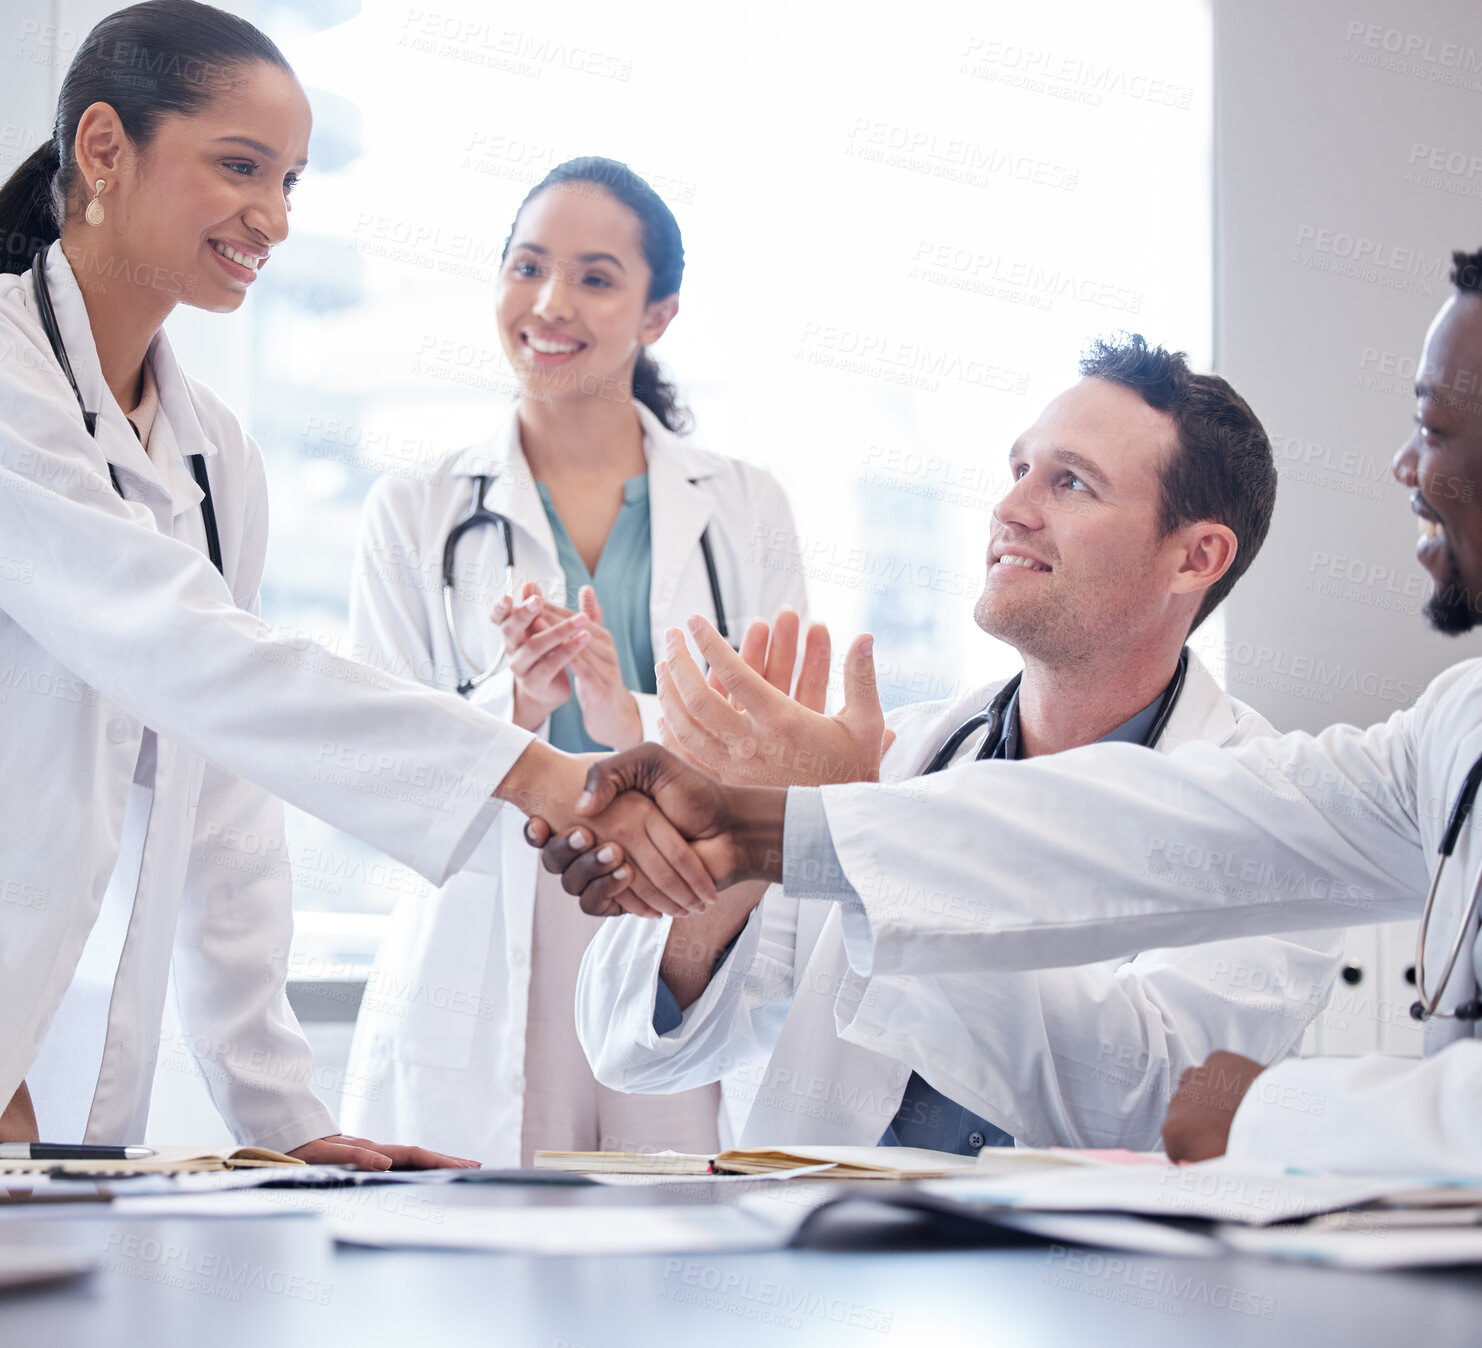 Buy stock photo Doctors, staff or meeting with handshake, applause or congratulations with healthcare innovation, wellness or opportunity. Group, team or coworkers clapping, shaking hands or partnership with growth 